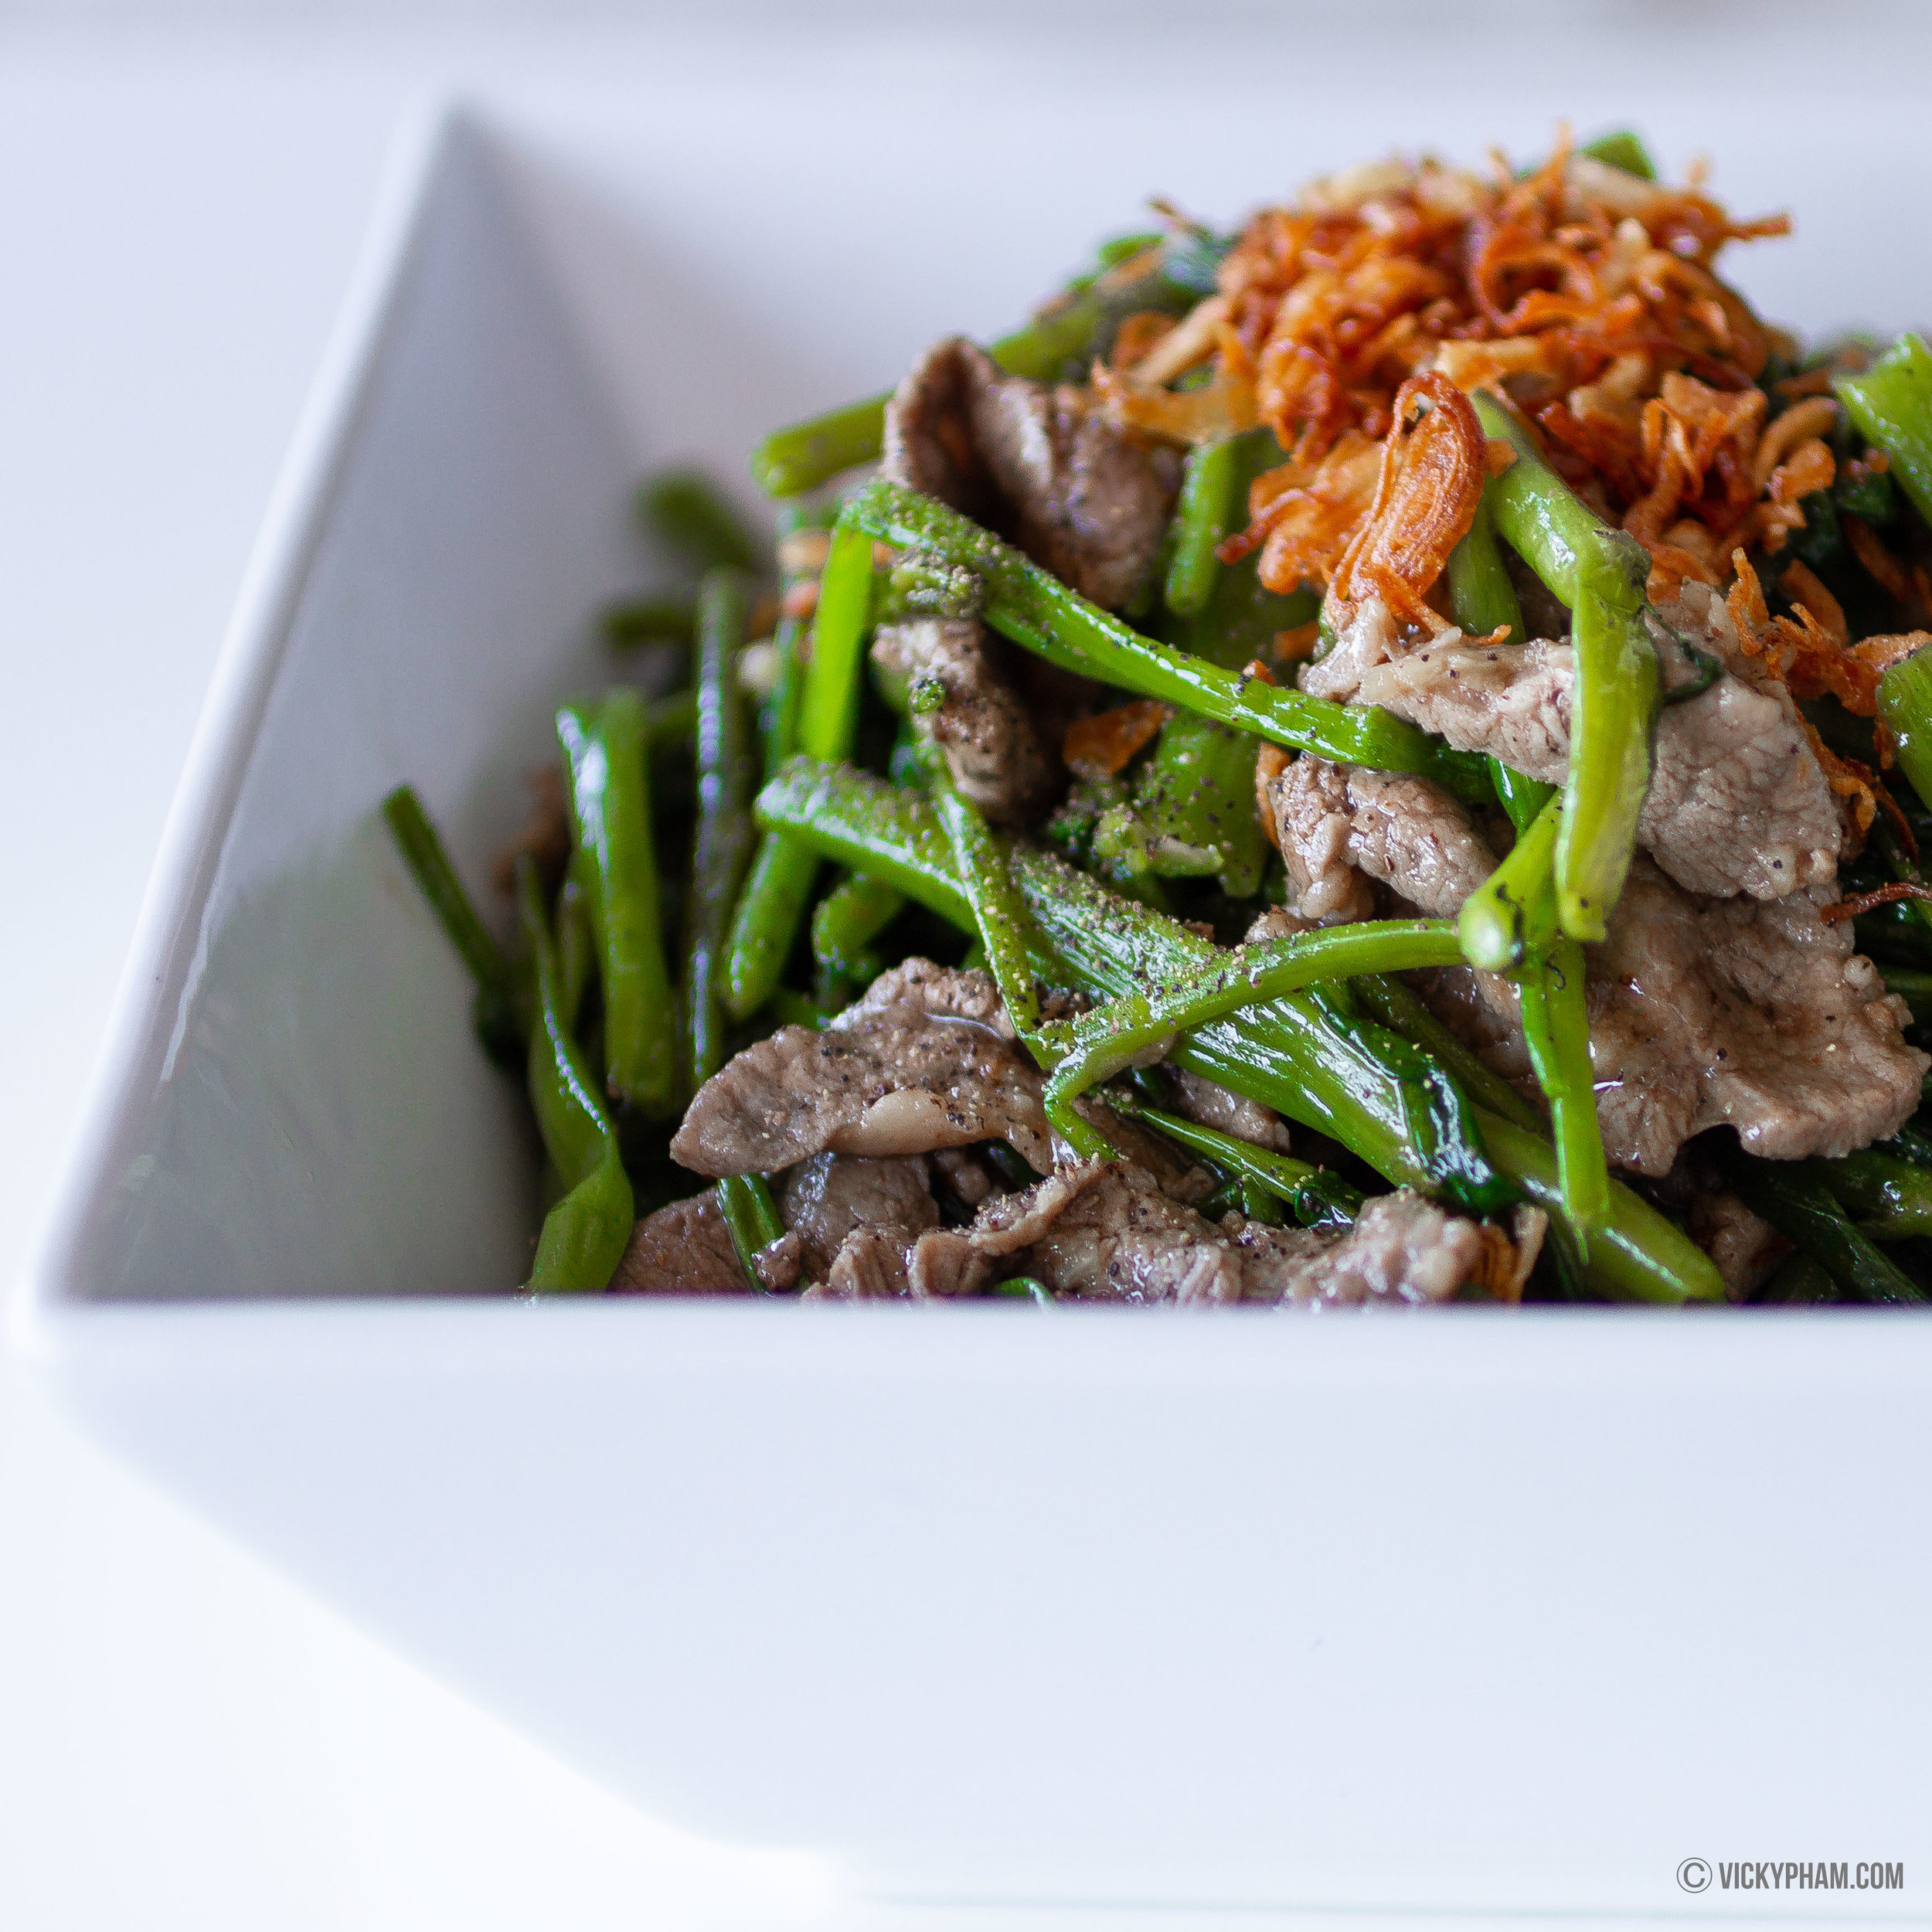 Stir-Fried Water Spinach/Morning Glory with Beef (Rau Muong Xao Thit Bo)